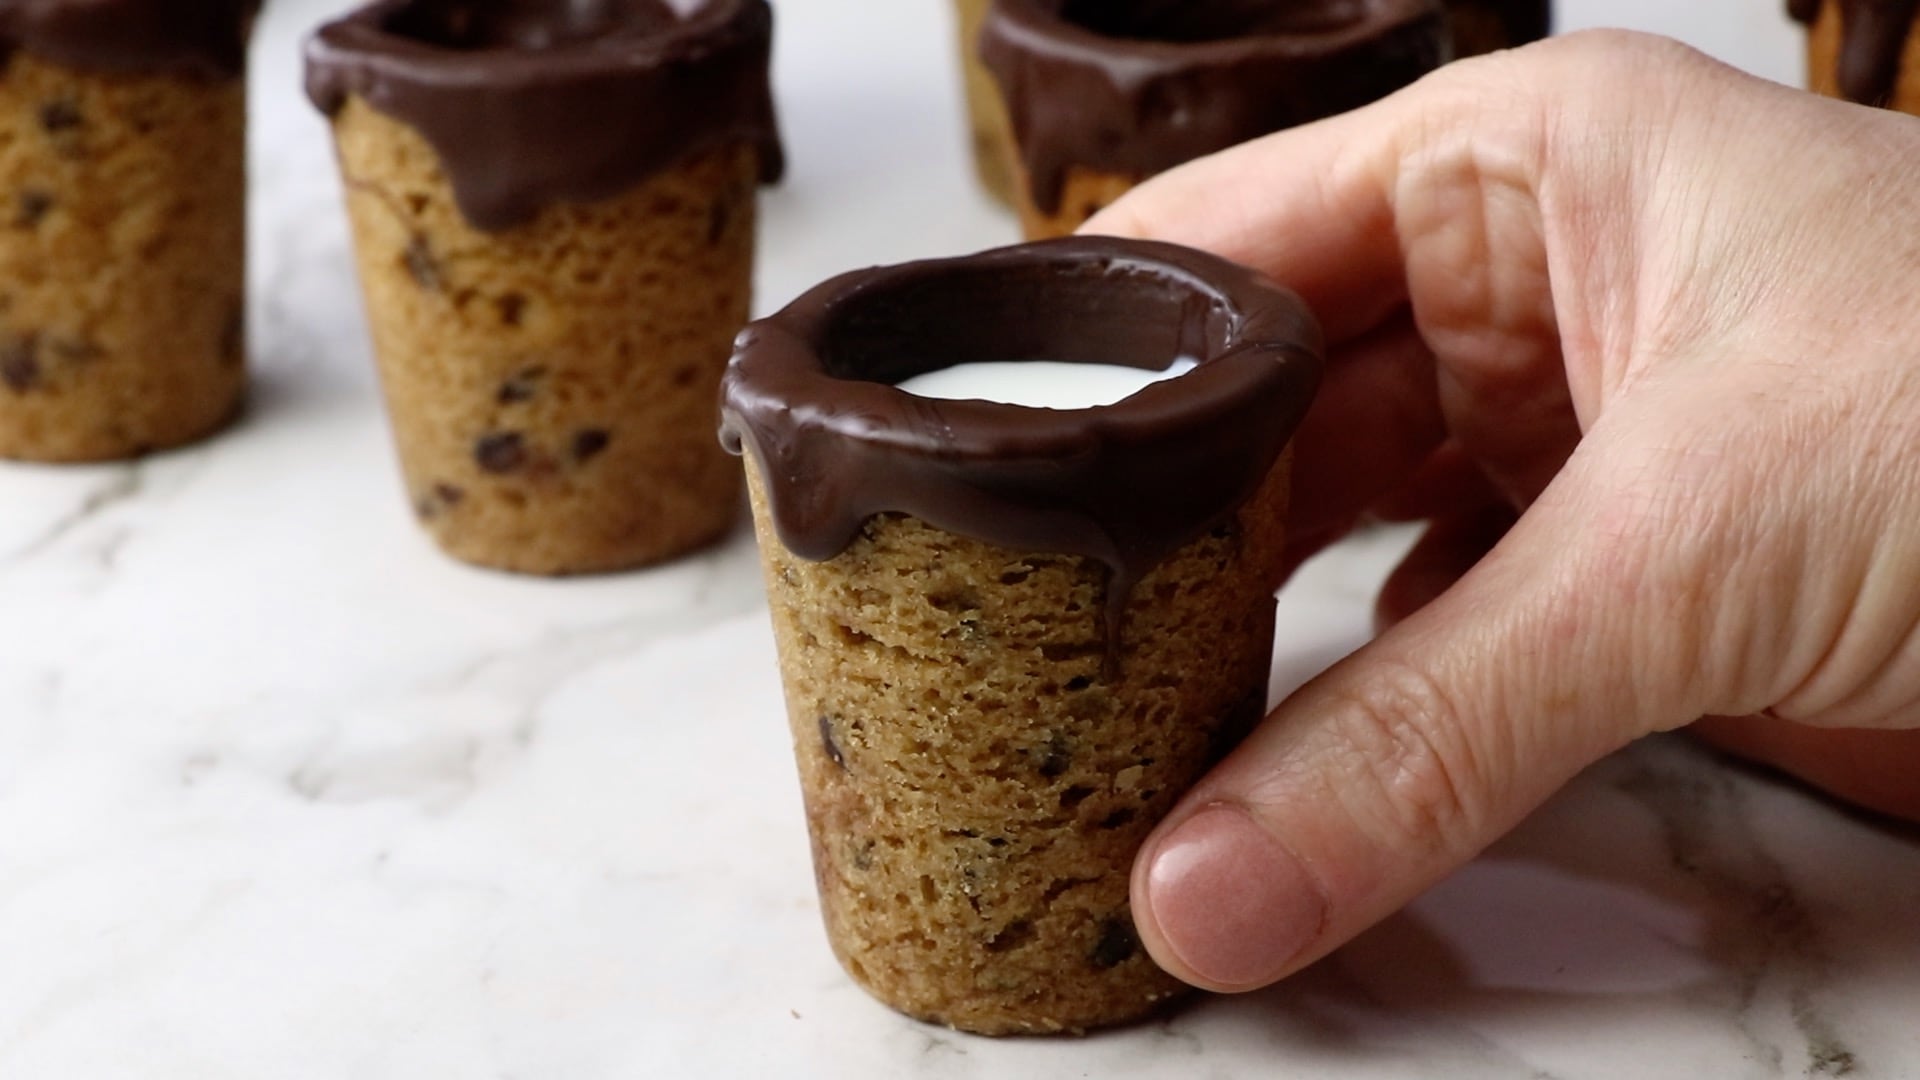 Cookie Shot Glasses Cocktail Recipe